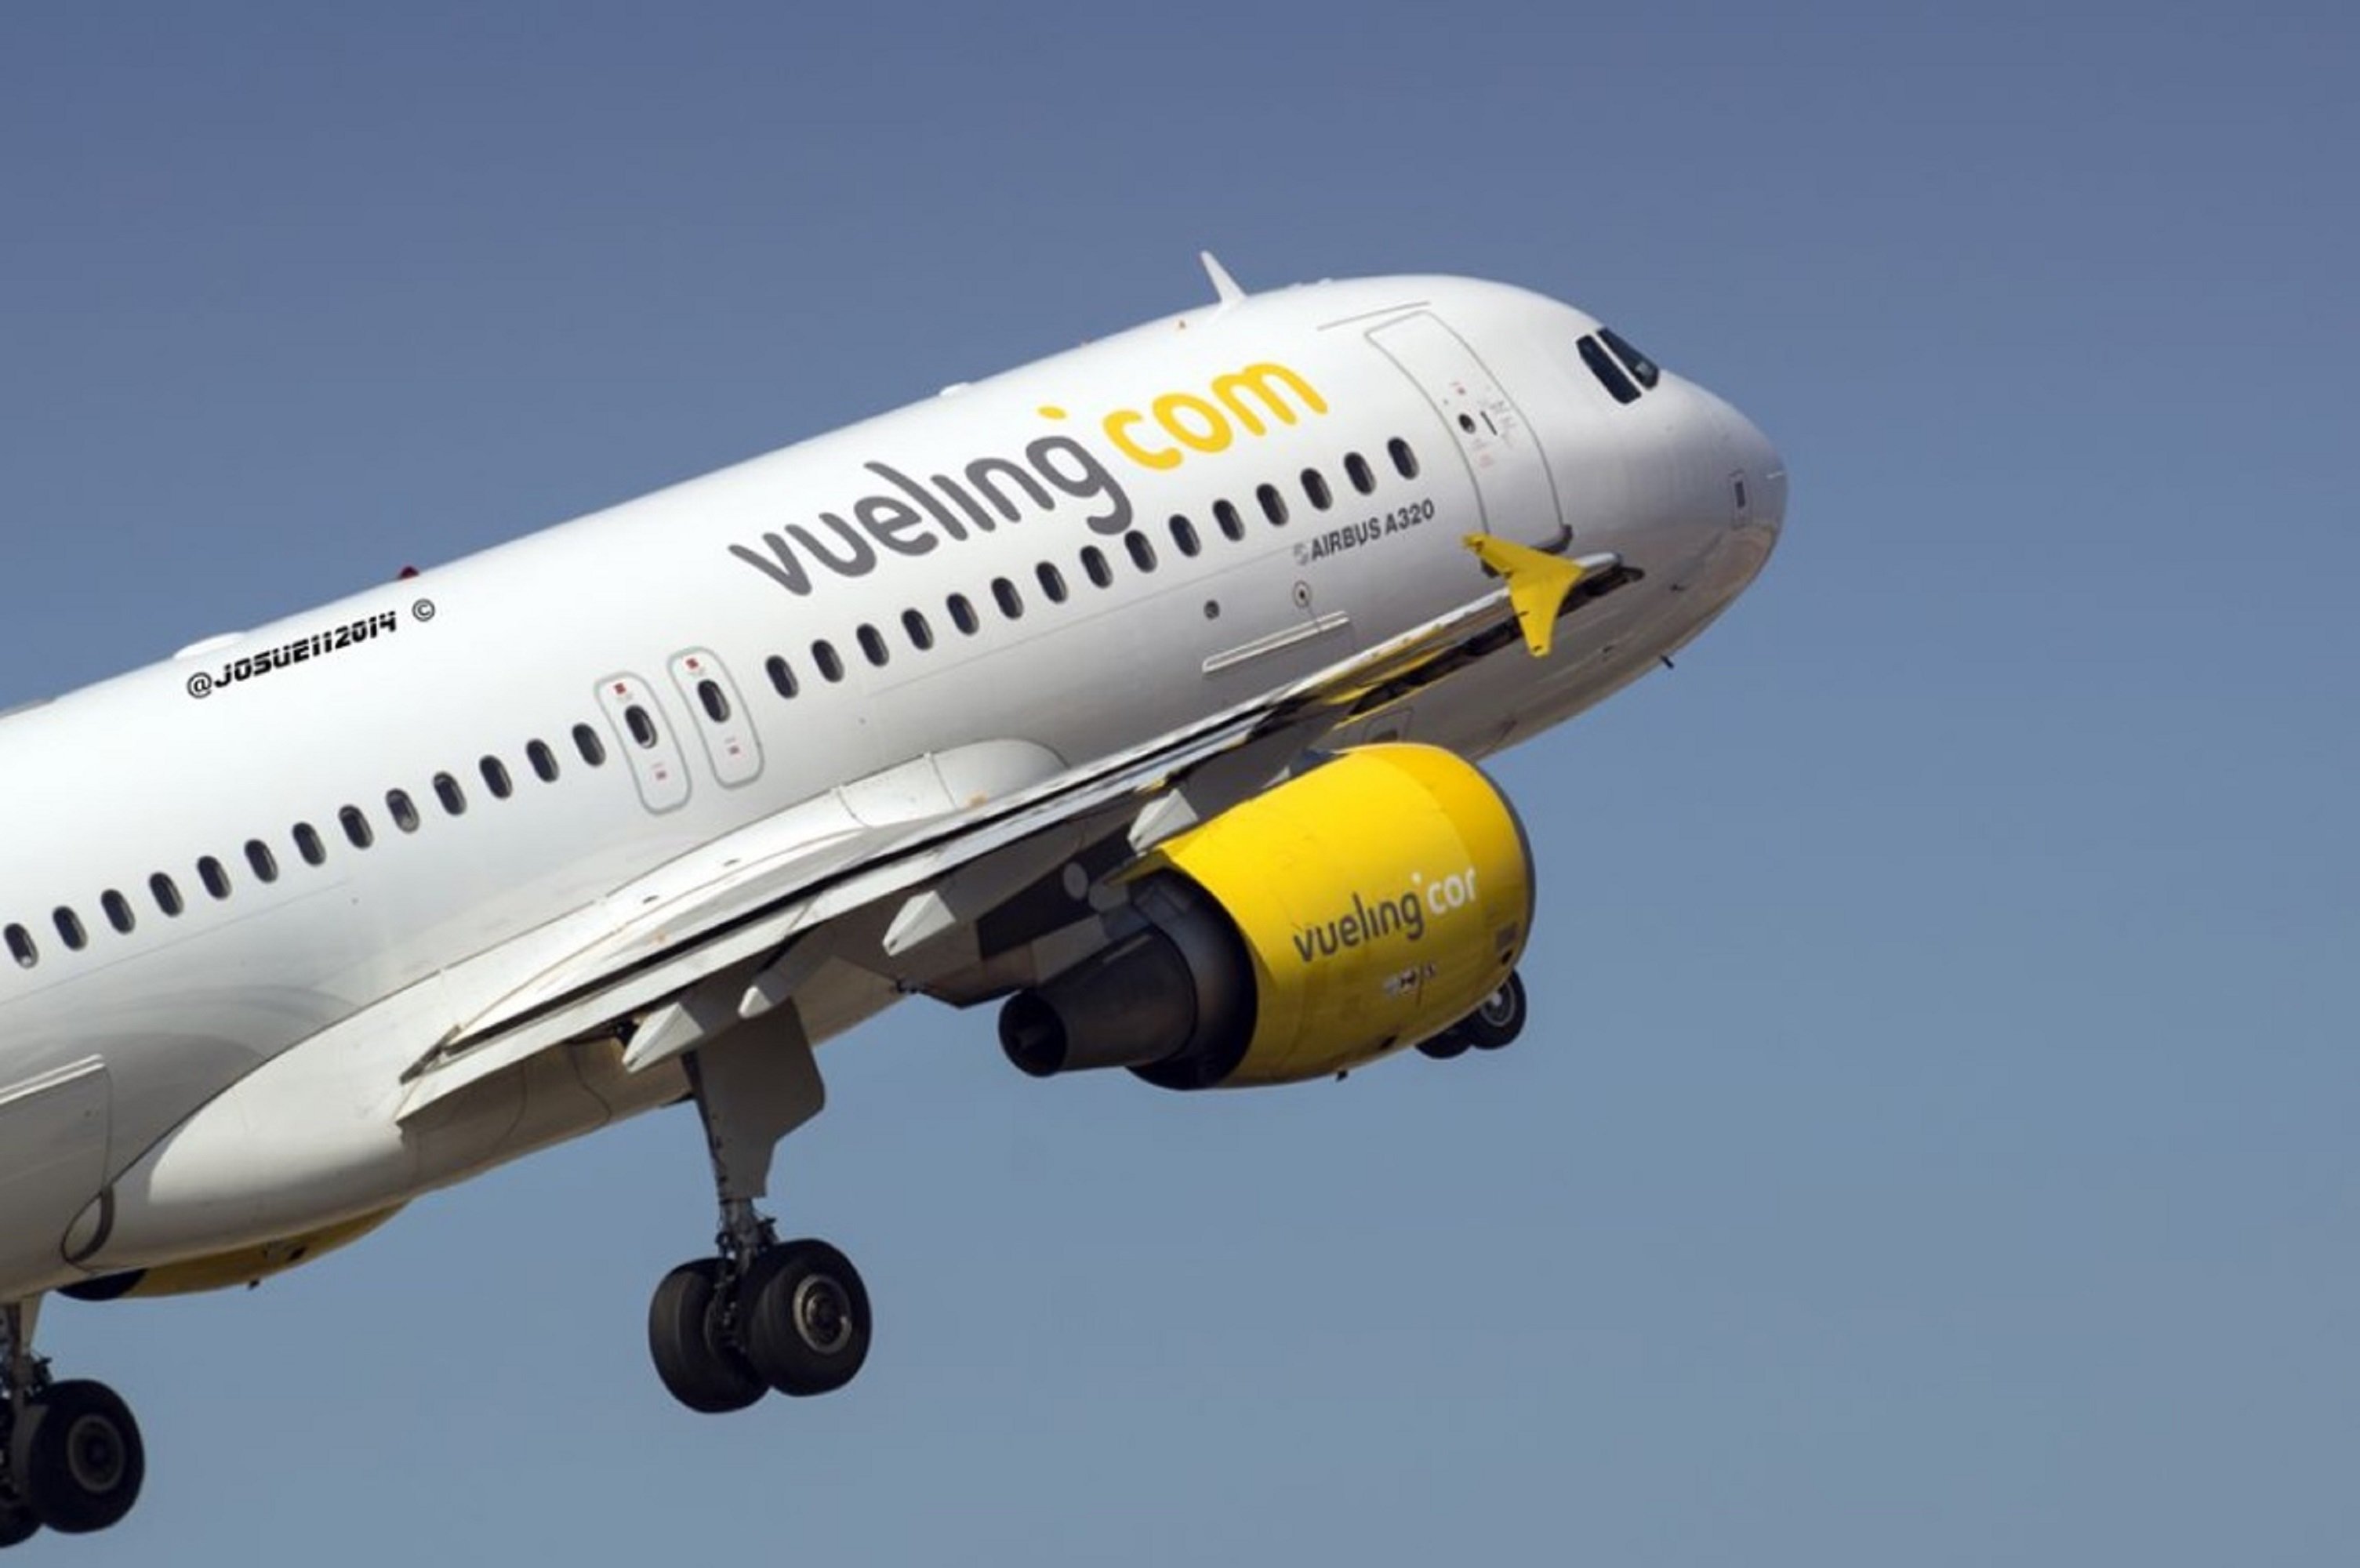 Vueling offers flights for 15€ for its 15th anniversary